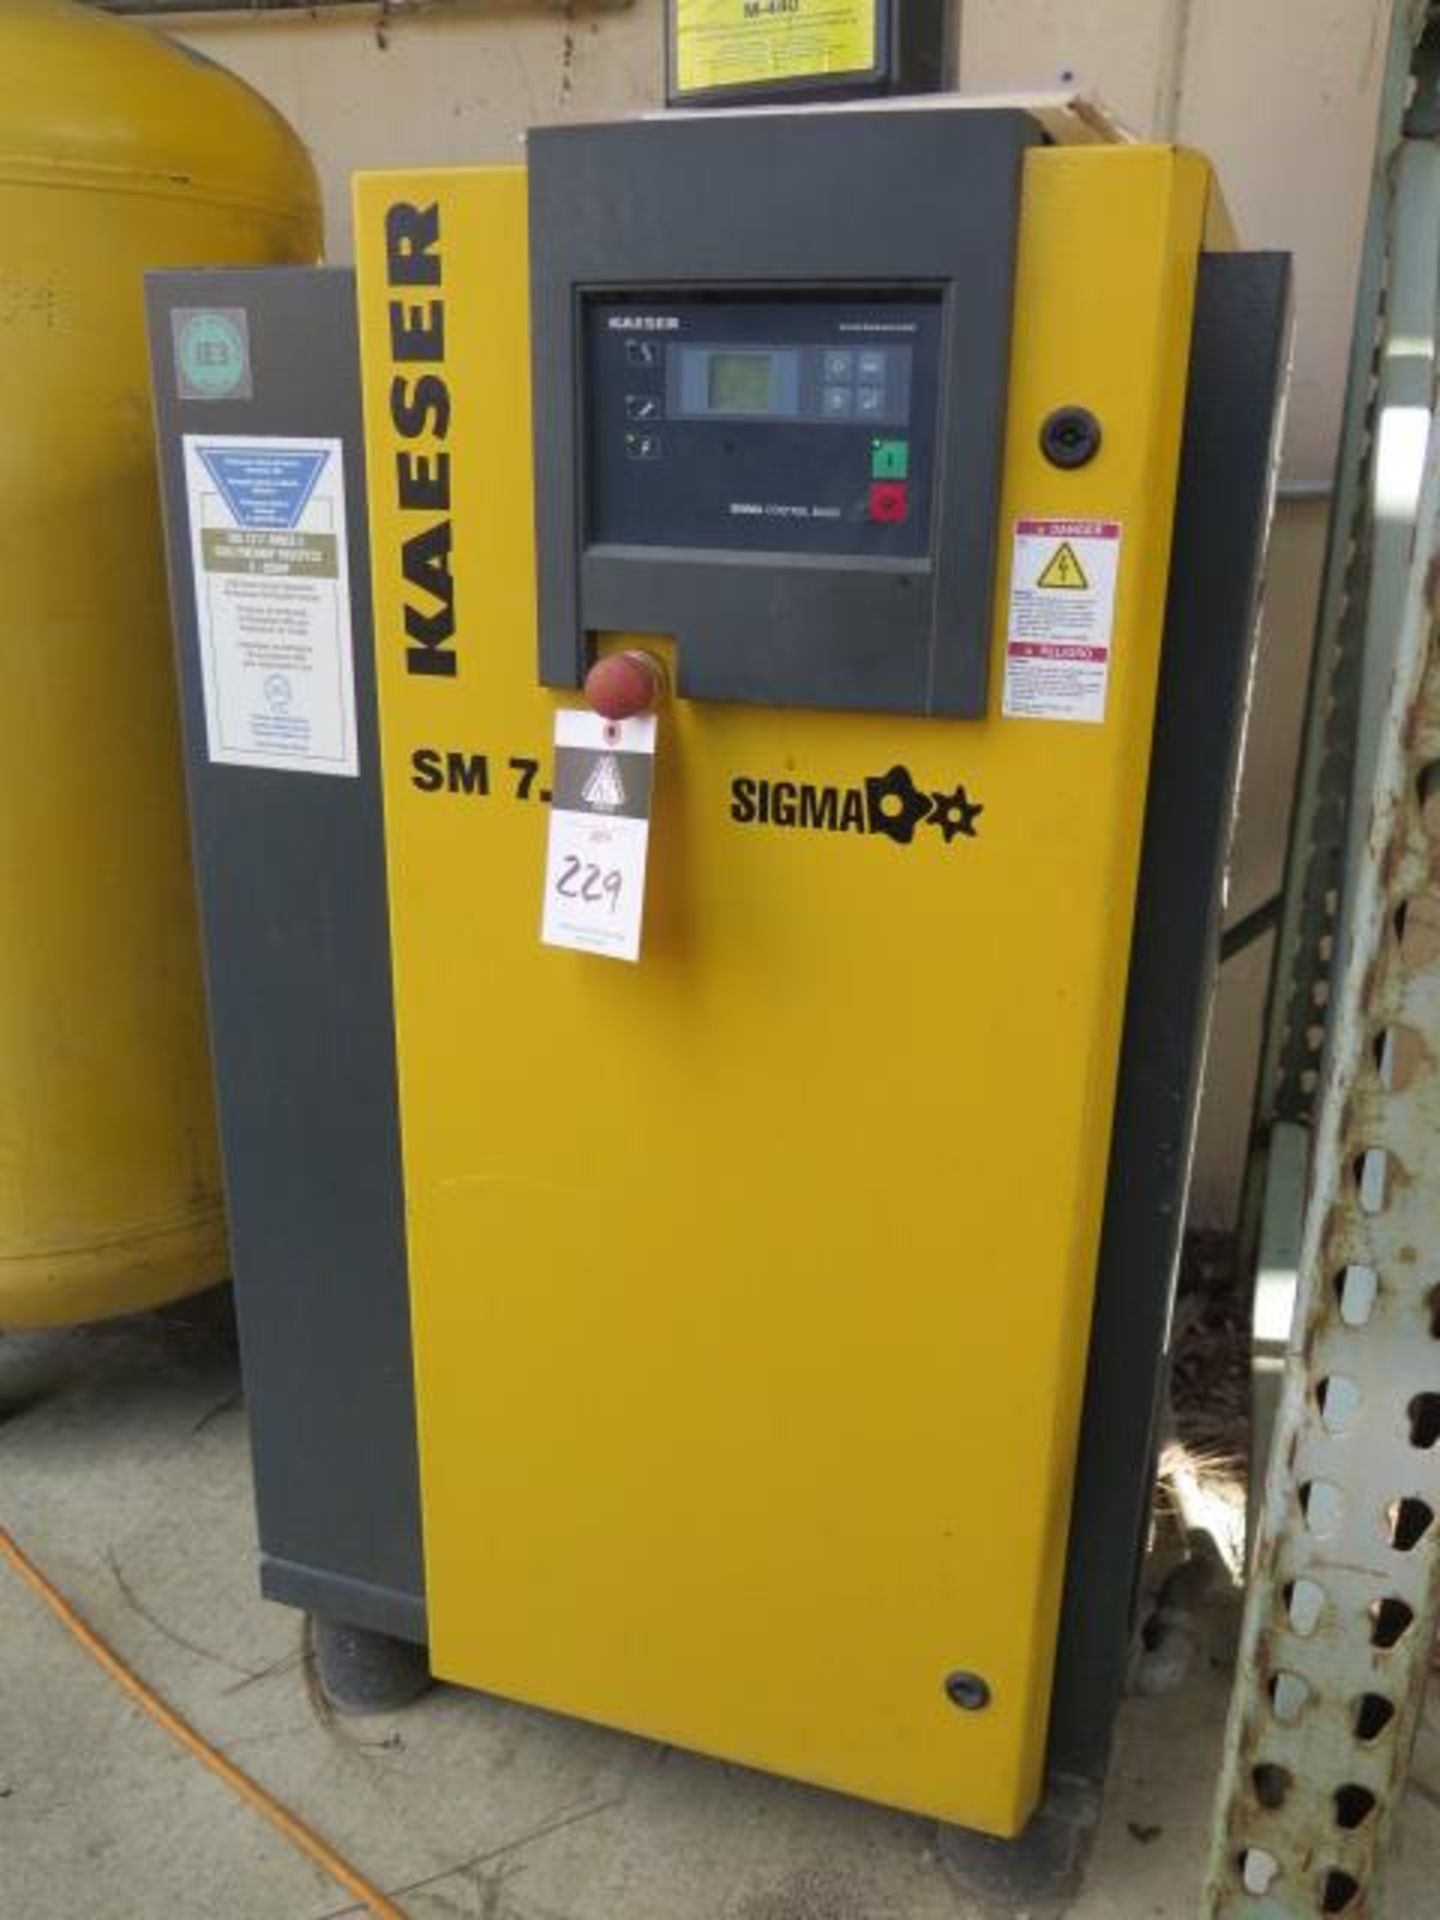 2015 Kaeser SM7.5 7.5Hp Rotary Air Compressor s/n 1243 w/Sigma Controls, 2018 Kaeser TA11,SOLD AS IS - Image 2 of 7